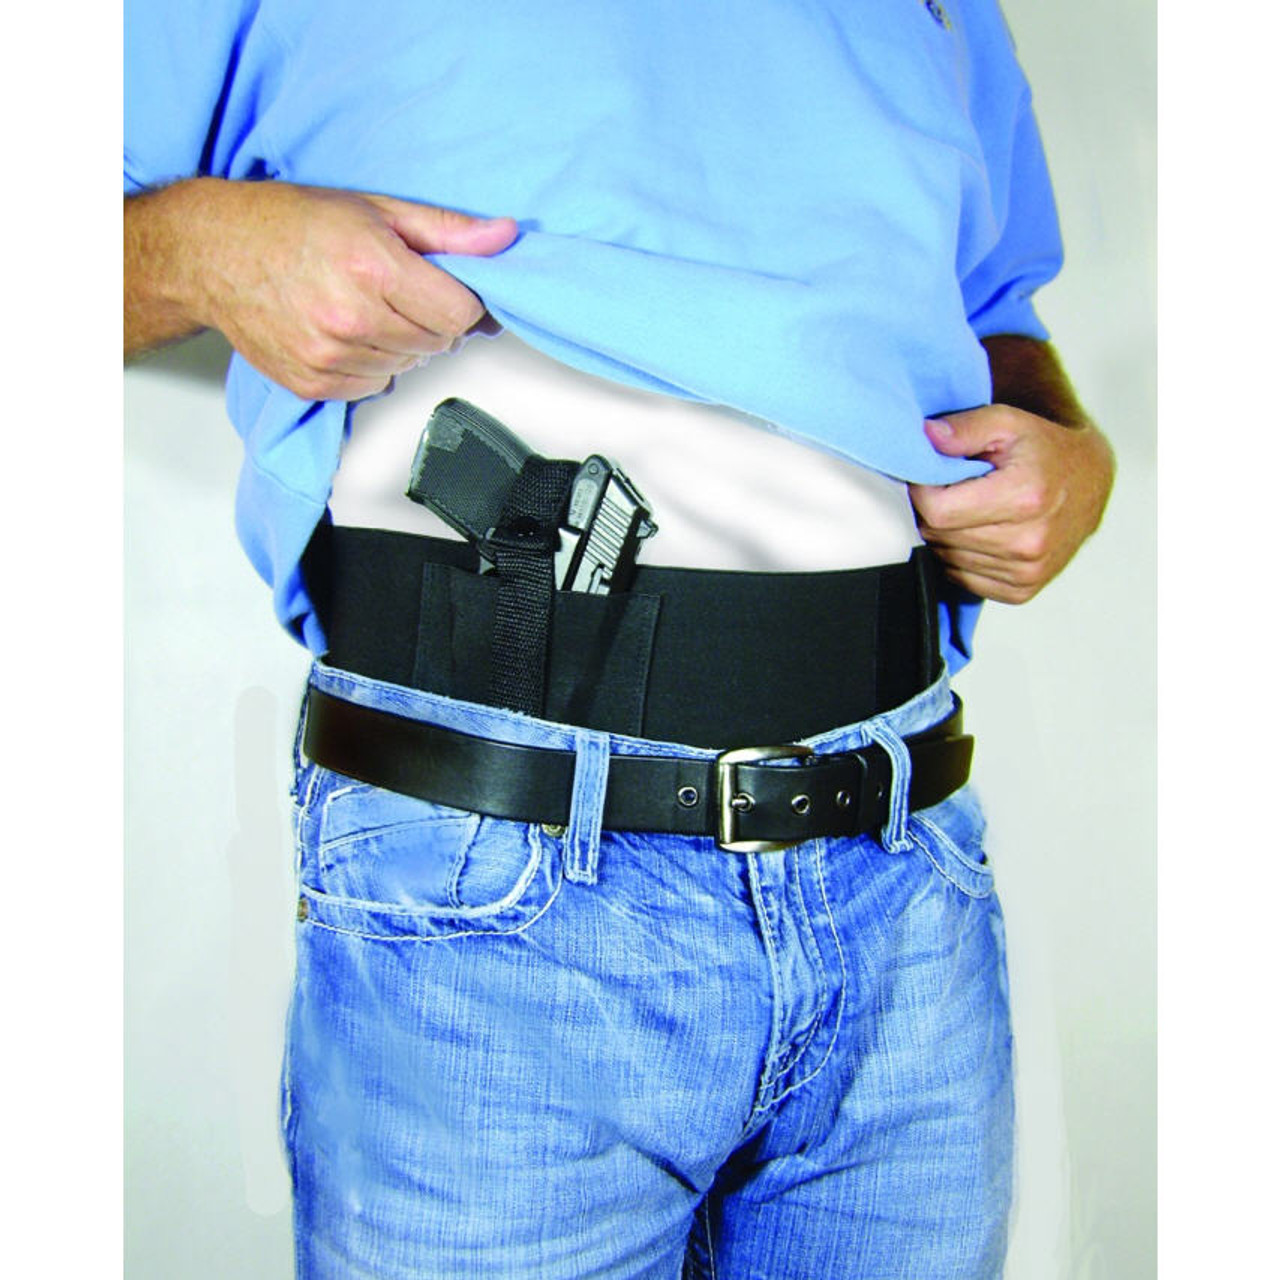  Crienten Belly Band Holster for Concealed Carry